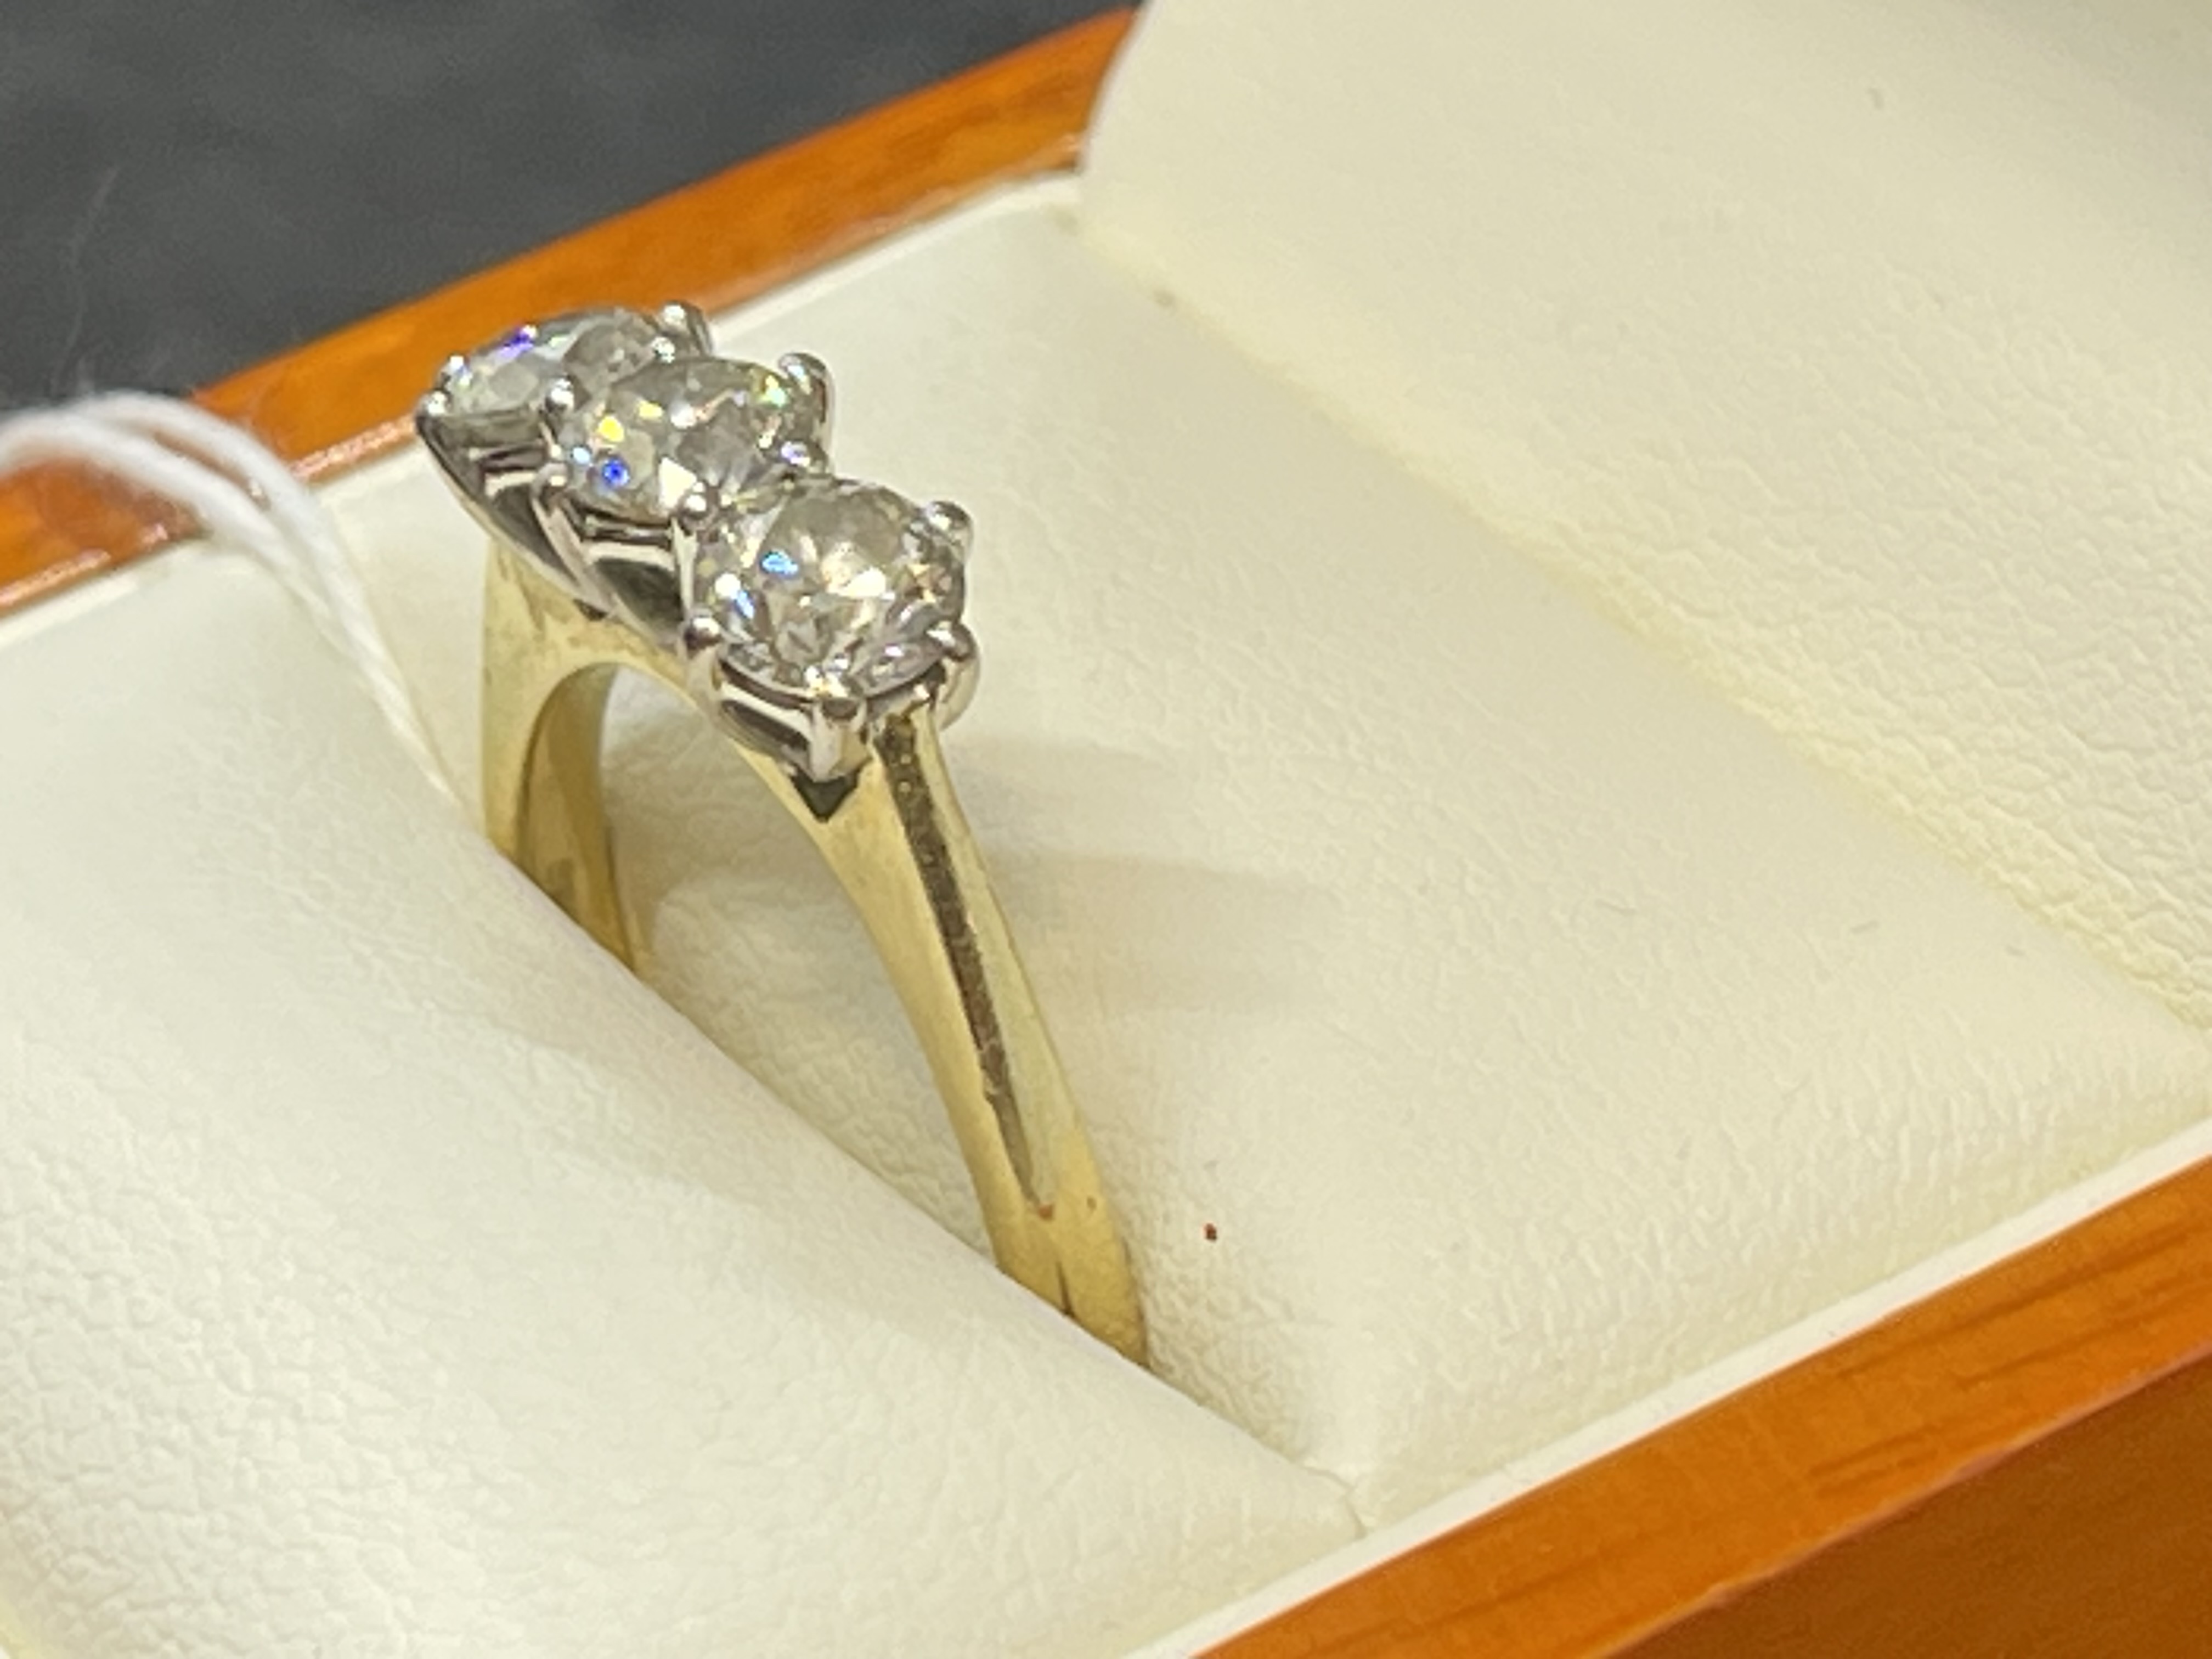 Hallmarked Jewellery: Ring set with three brilliant cut diamonds, weight of one 0.50ct, colour K - Image 4 of 6